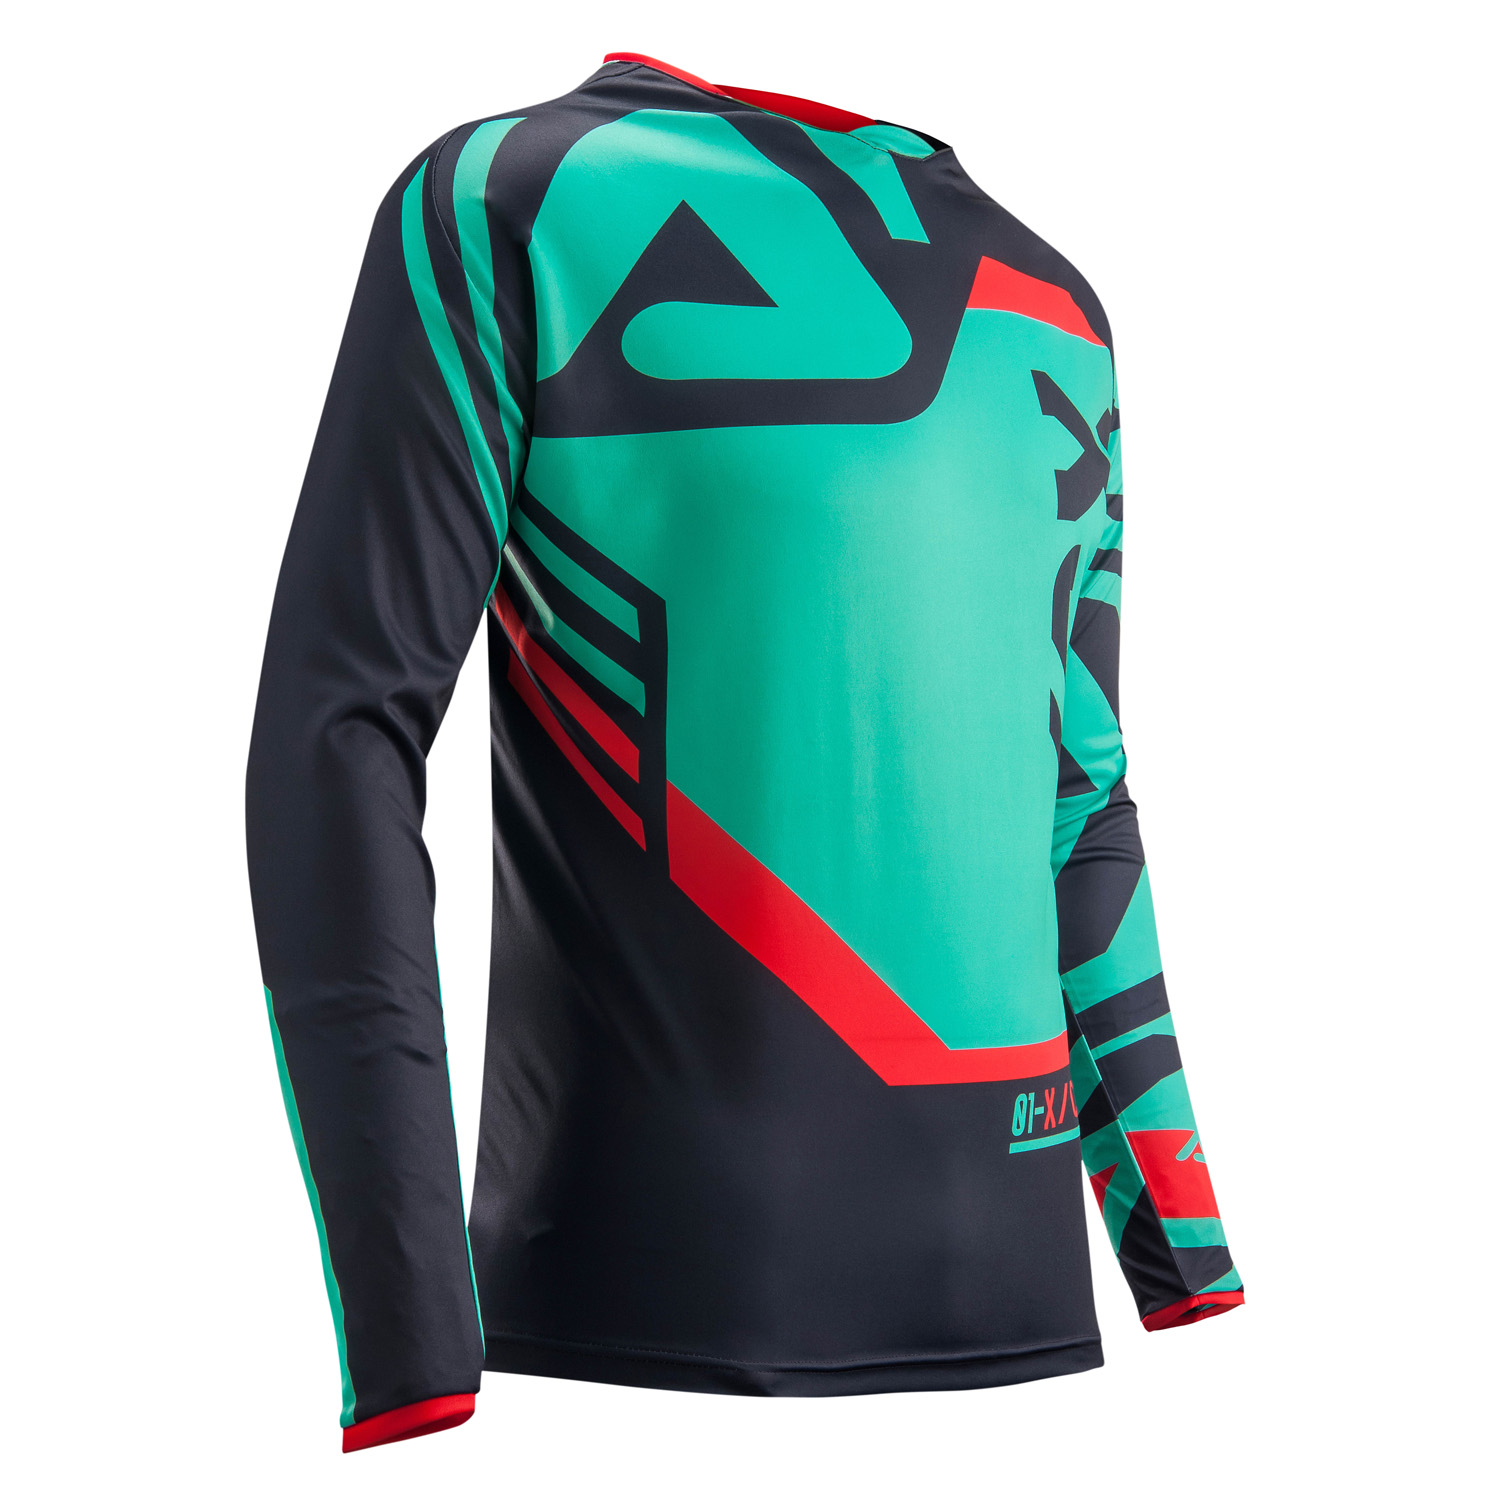 Acerbis Jersey Dreammevil Turquoise